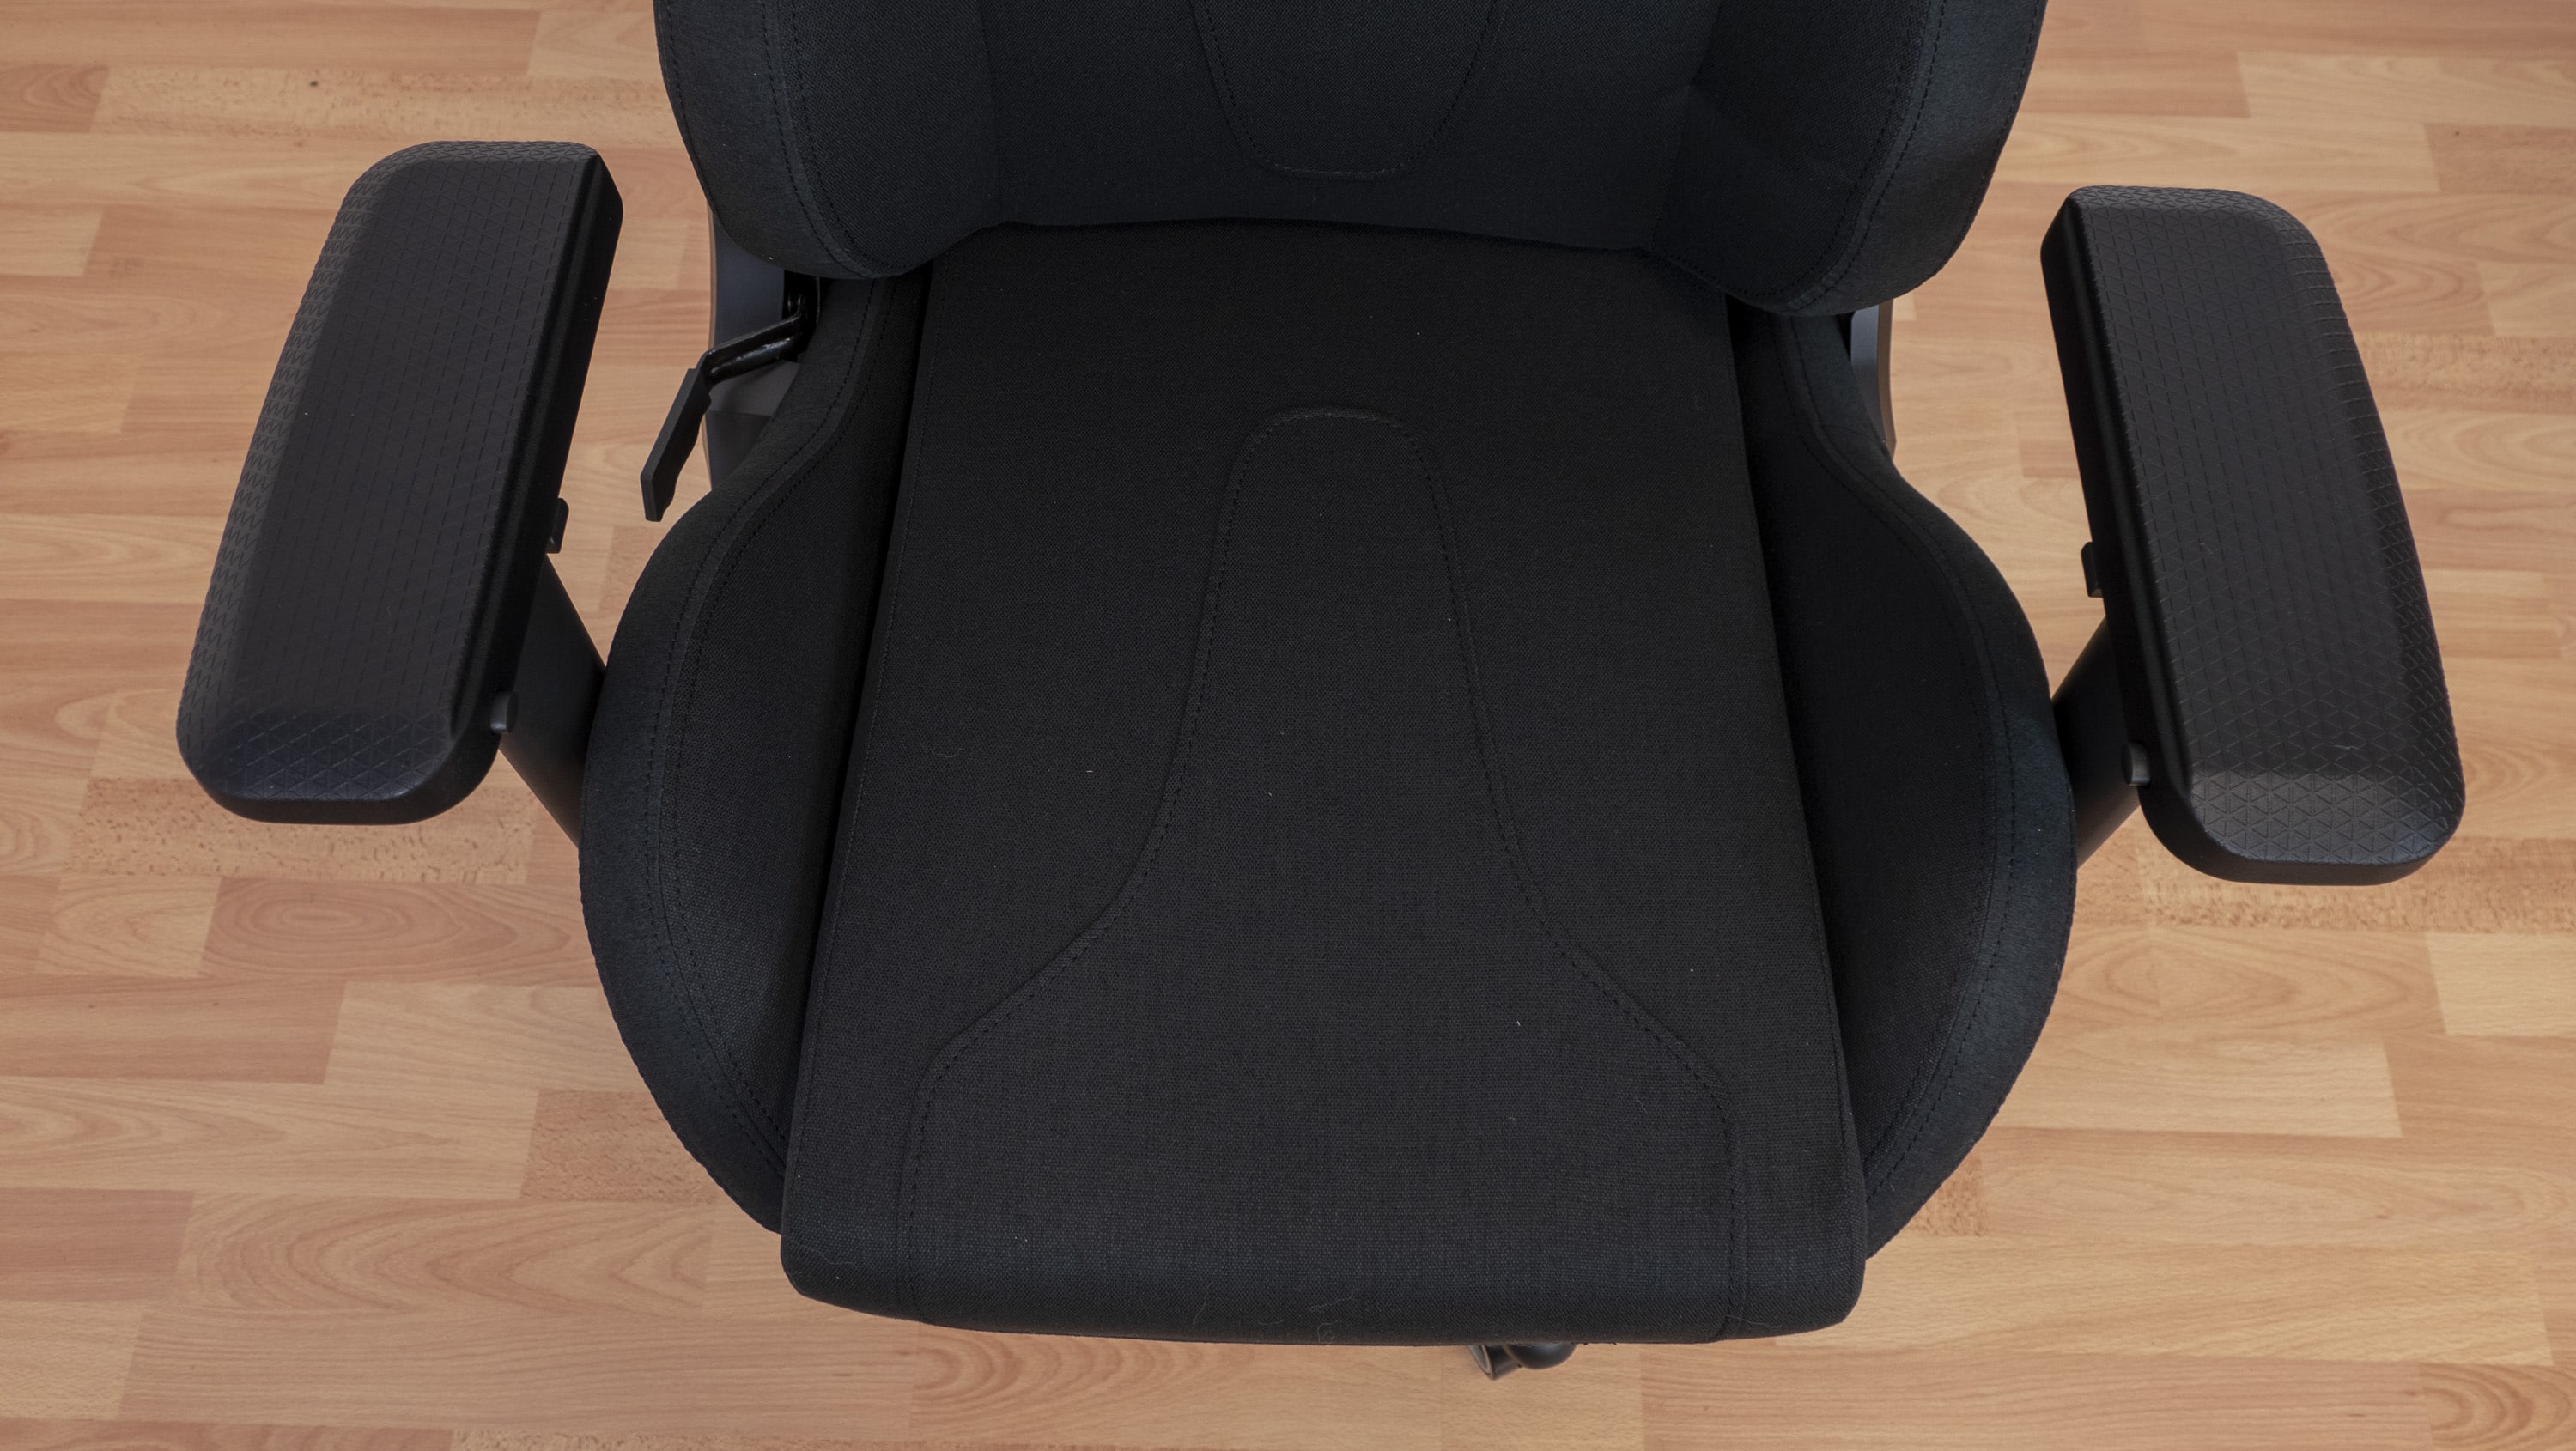 There\'s Corsair for room everyone! test: gaming chair in TC200